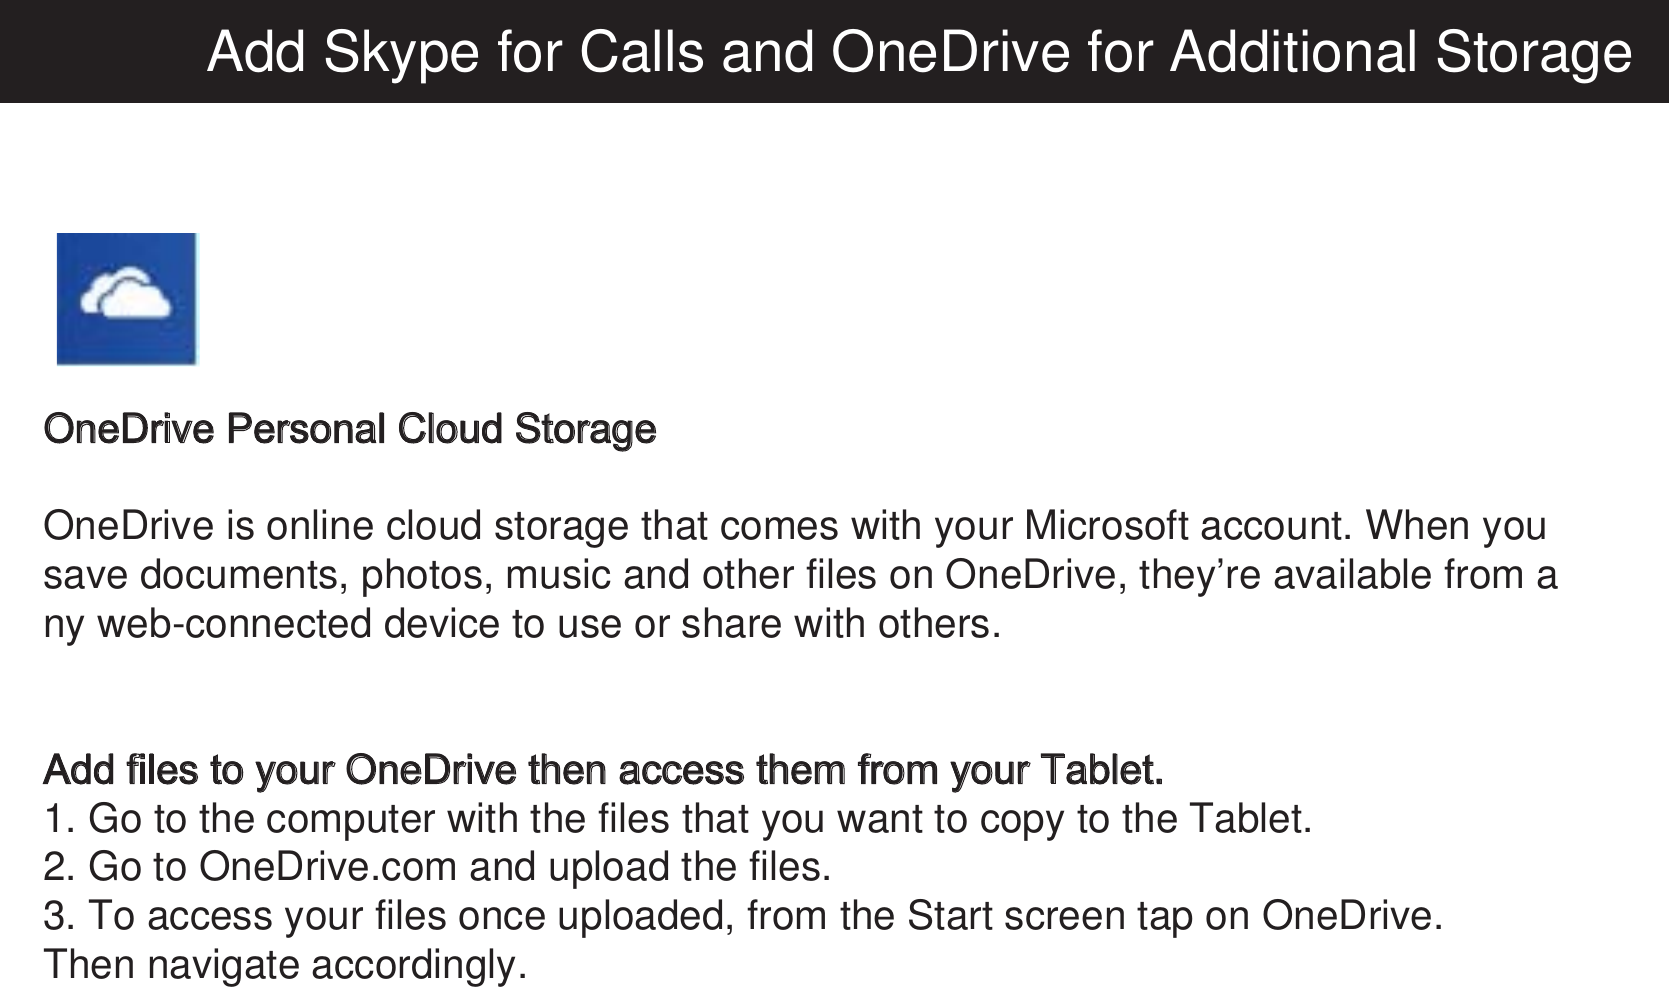 Add Skype for Calls and OneDrive for Additional StorageOneDrive Personal Cloud StorageOneDrive is online cloud storage that comes with your Microsoft account. When you save documents, photos, music and other files on OneDrive, they’re available from any web-connected device to use or share with others.Add files to your OneDrive then access them from your Tablet.1. Go to the computer with the files that you want to copy to the Tablet.2. Go to OneDrive.com and upload the files.3. To access your files once uploaded, from the Start screen tap on OneDrive.Then navigate accordingly. 